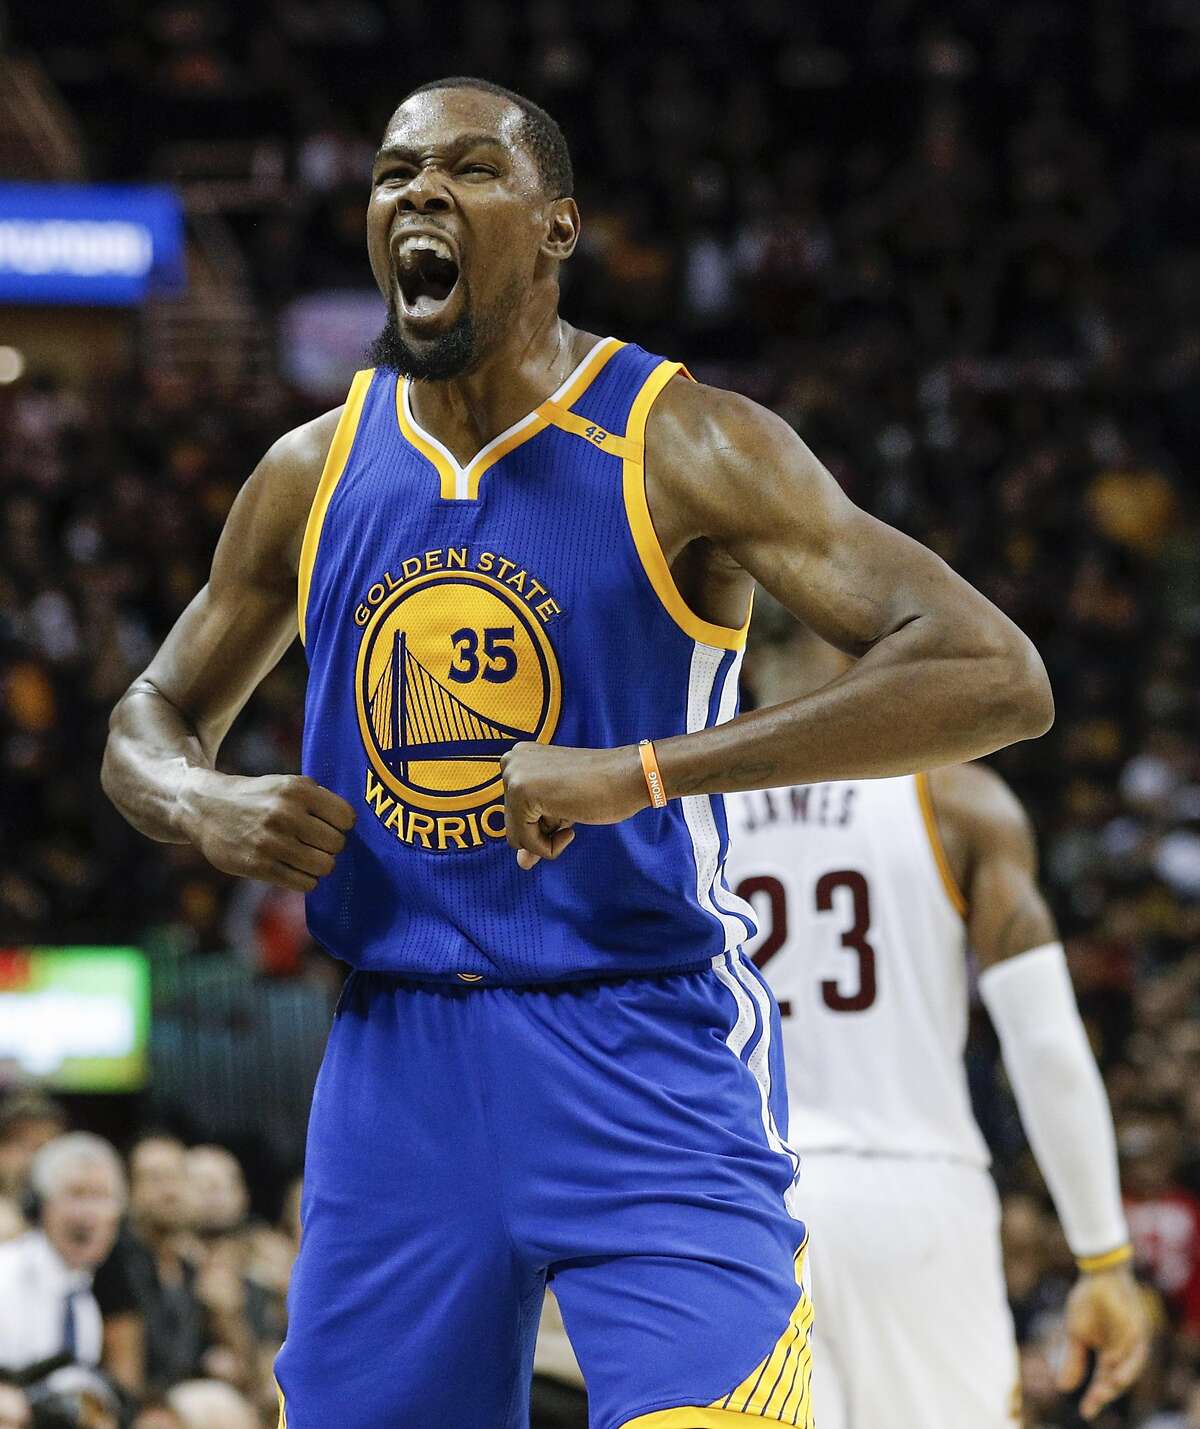 Golden State Warriors' Kevin Durant reacts in the fourth quarter during Game 3 of the 2017 NBA Finals at Quicken Loans Arena on Wednesday, June 7, 2017 in Cleveland, Ohio